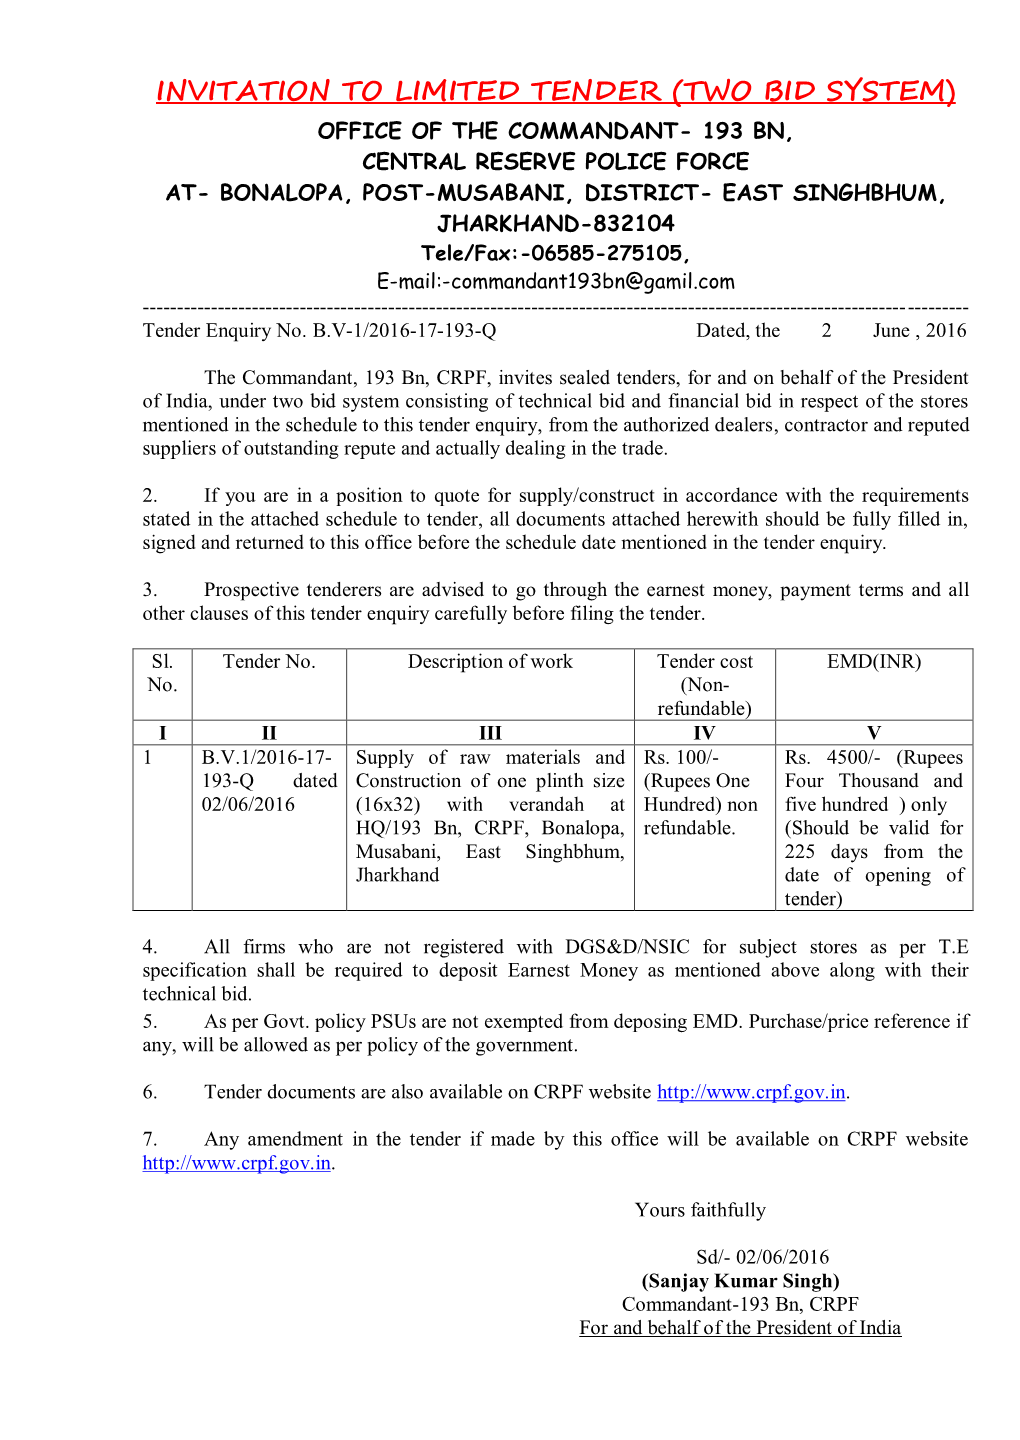 Invitation to Limited Tender (Two Bid System)